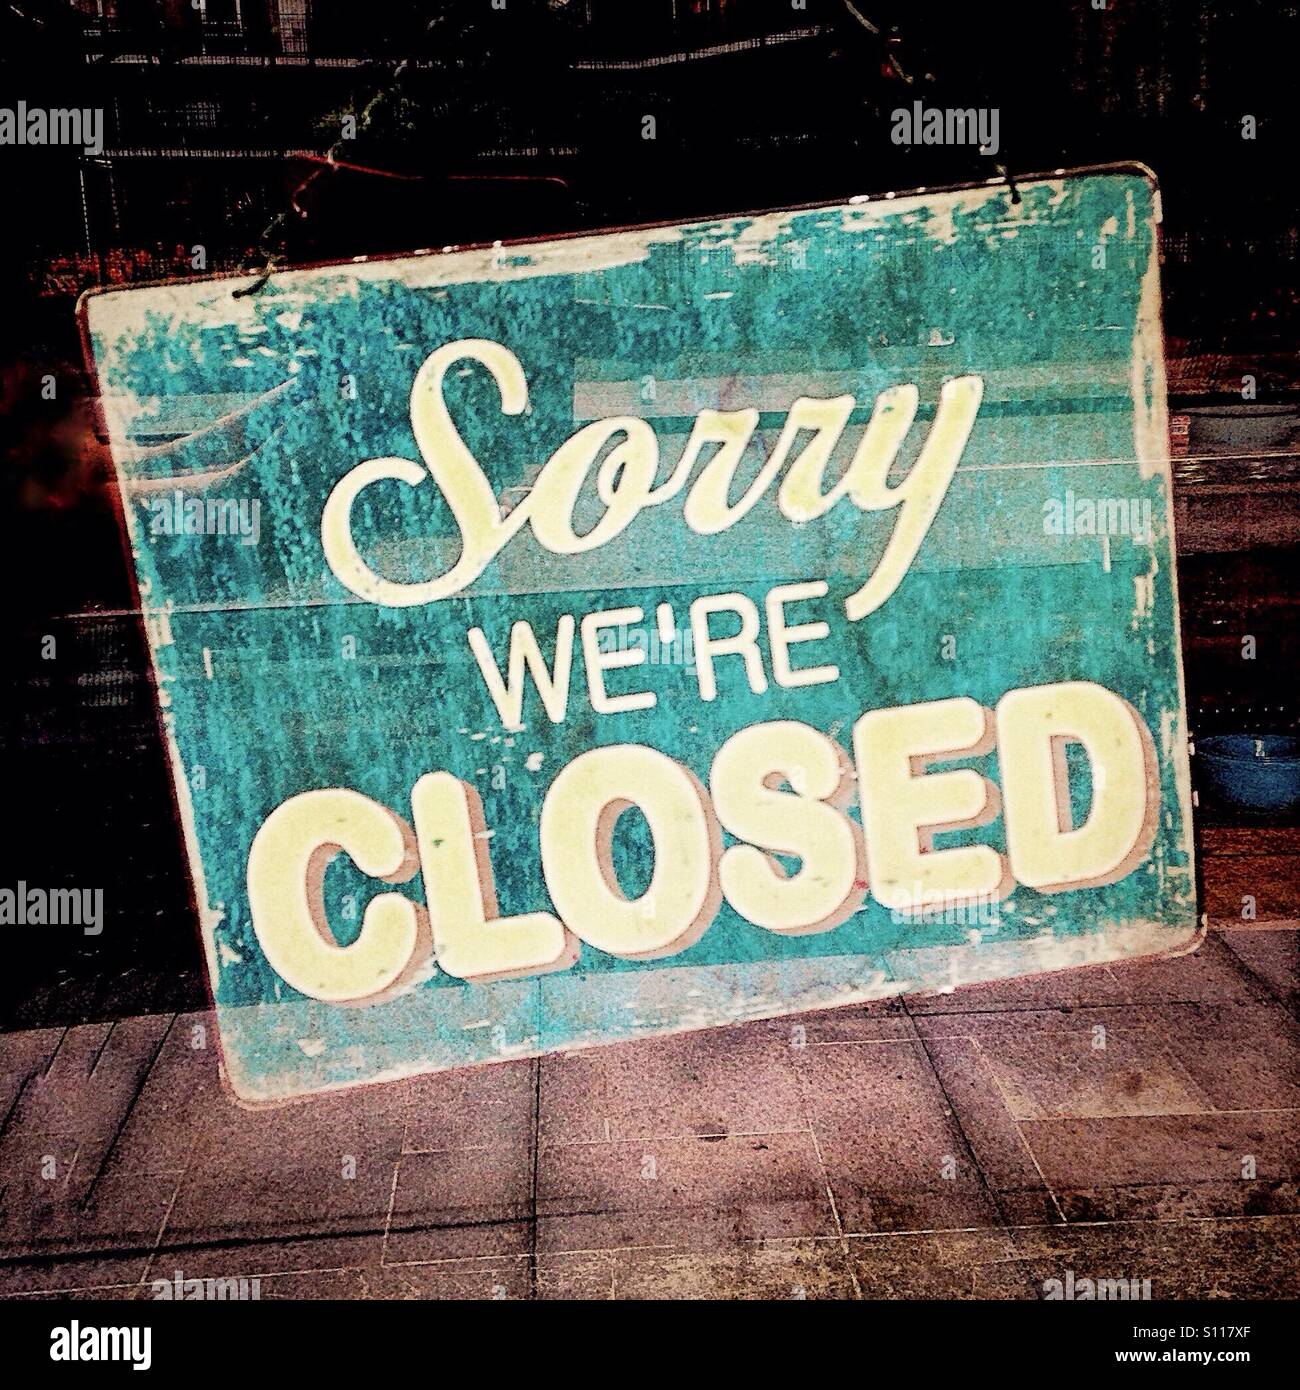 Sorry we're closed shop sign Stock Photo